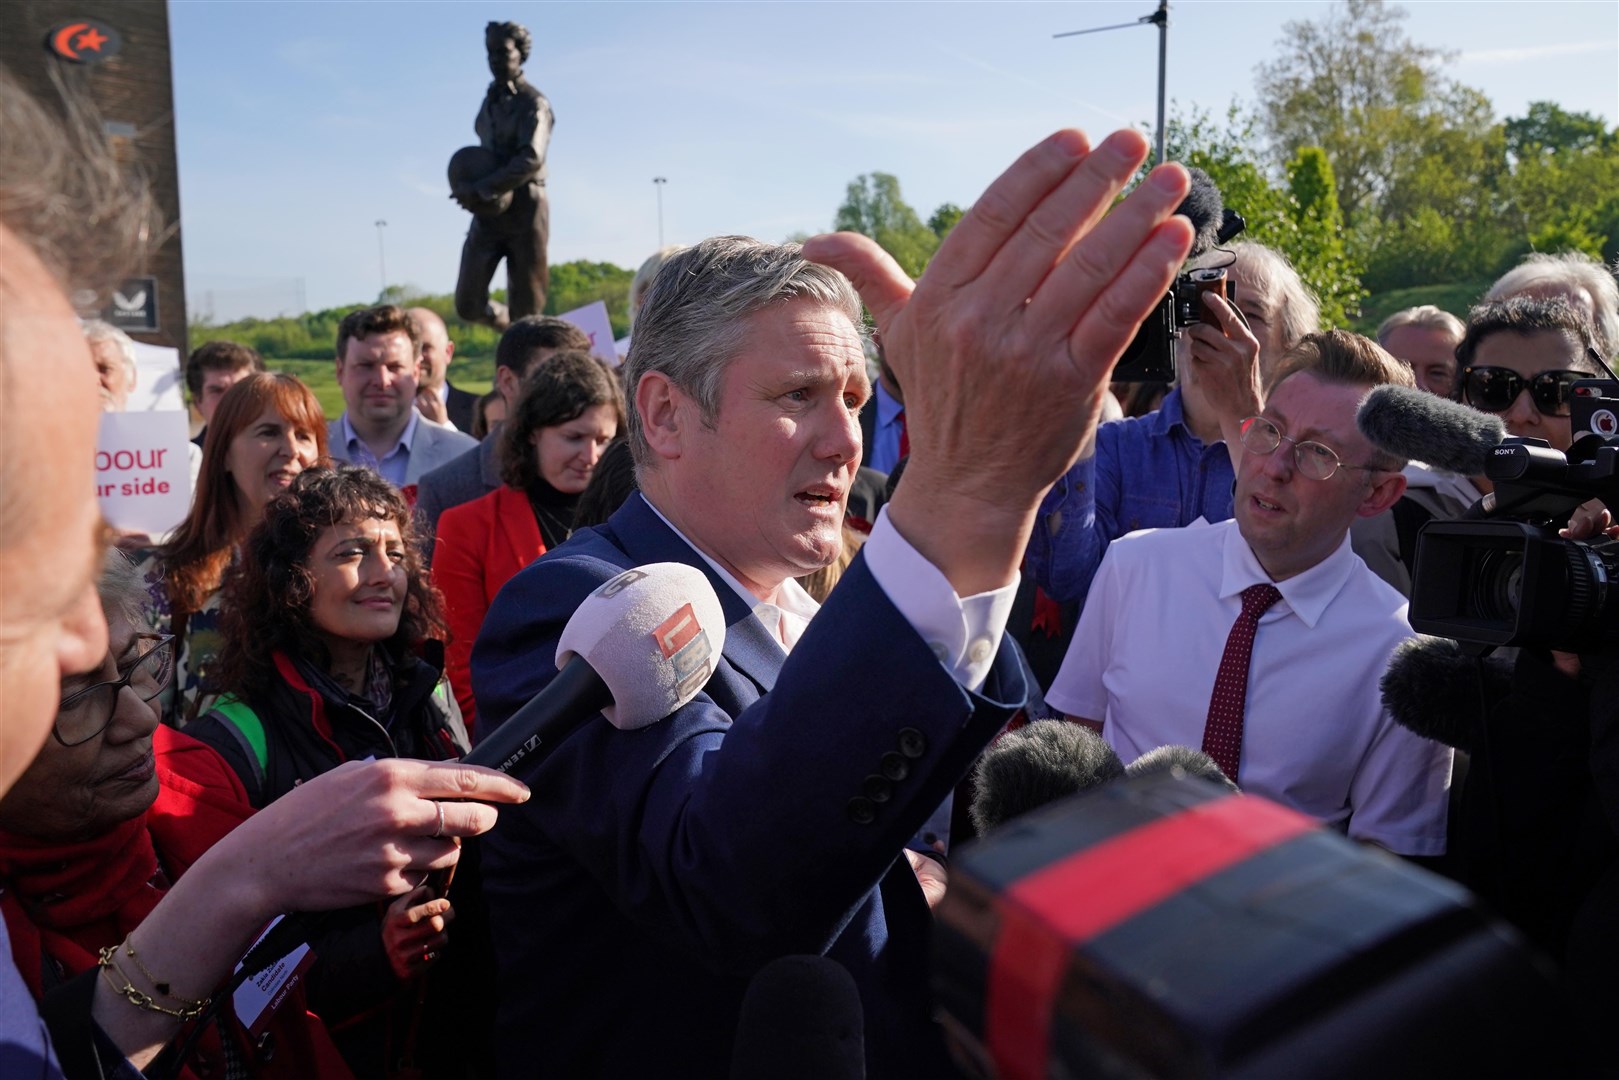 Labour leader Sir Keir Starmer speaks to supporters in Barnet, north London, after the party clinched victory in several key election battlegrounds (Jonathan Brady/PA)